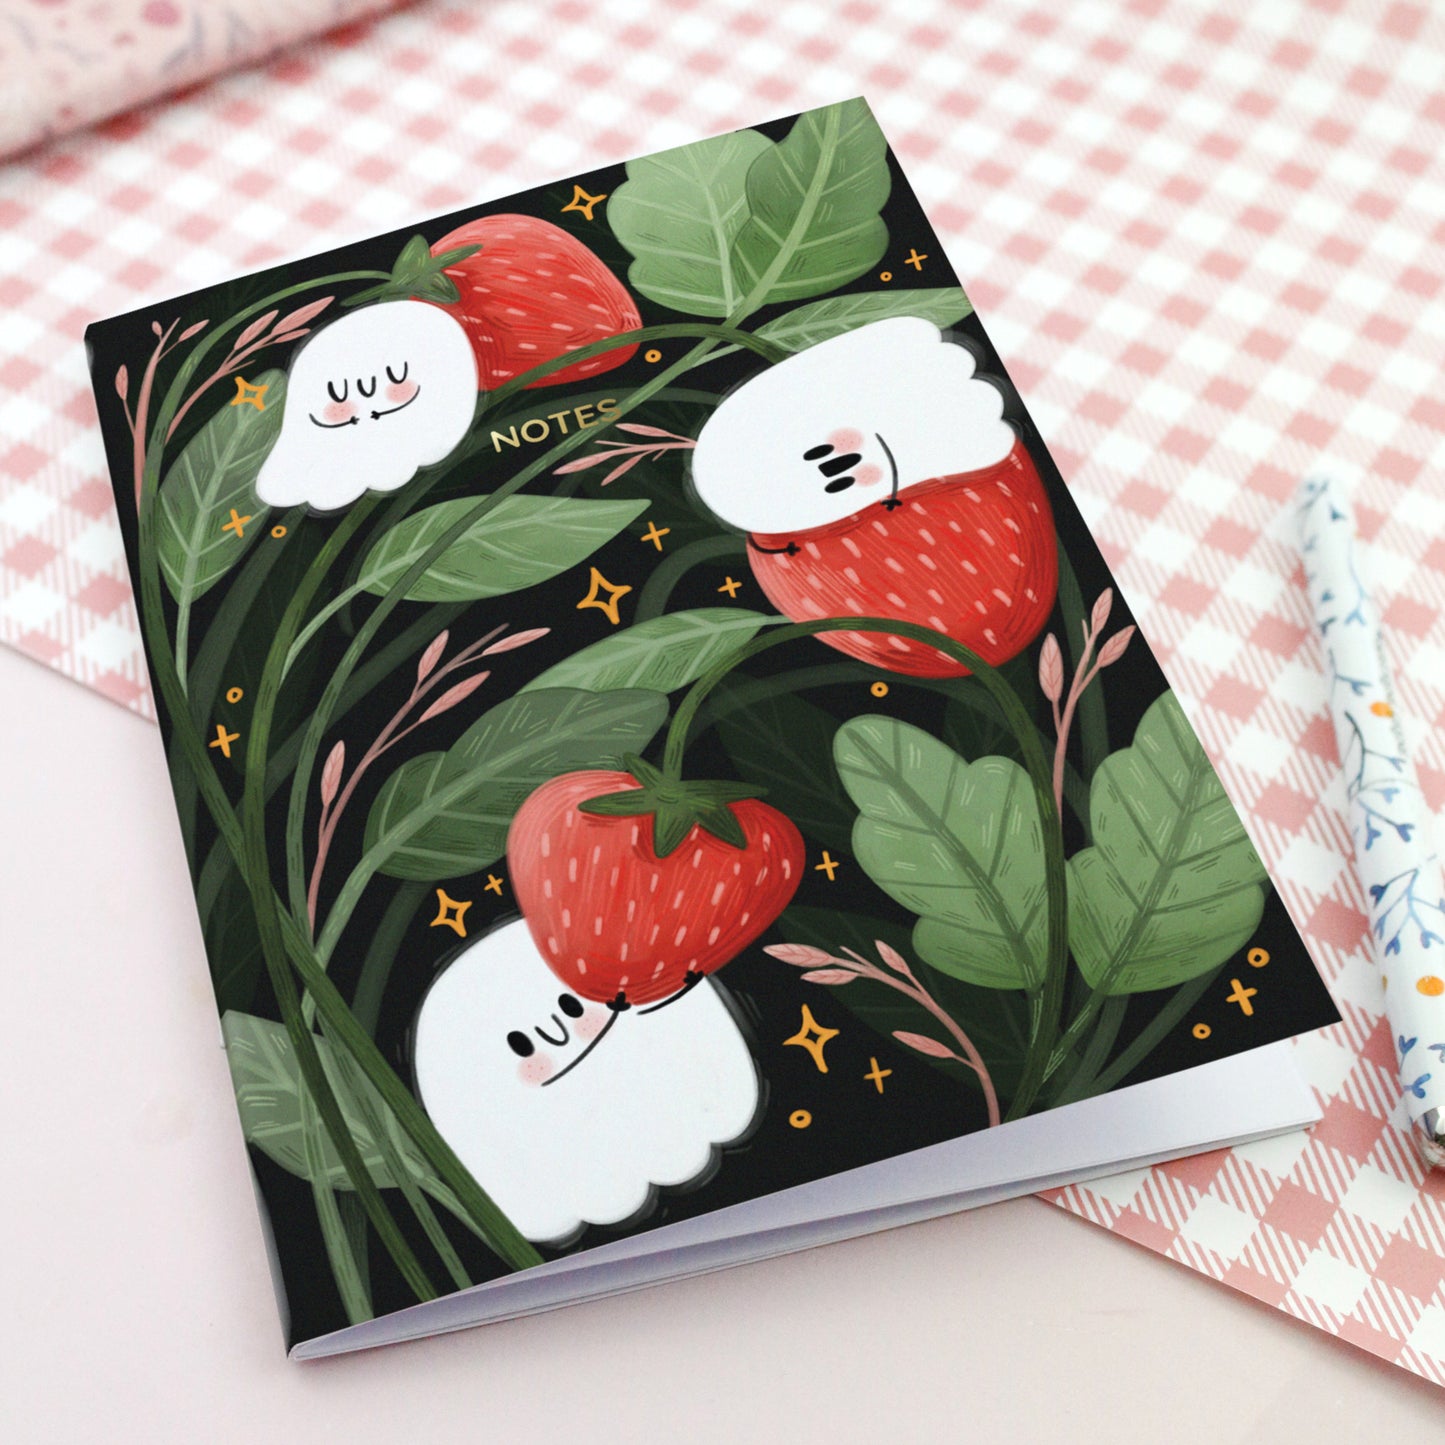 Ghosty & Strawberries soft notebook - Summer Stationery gift